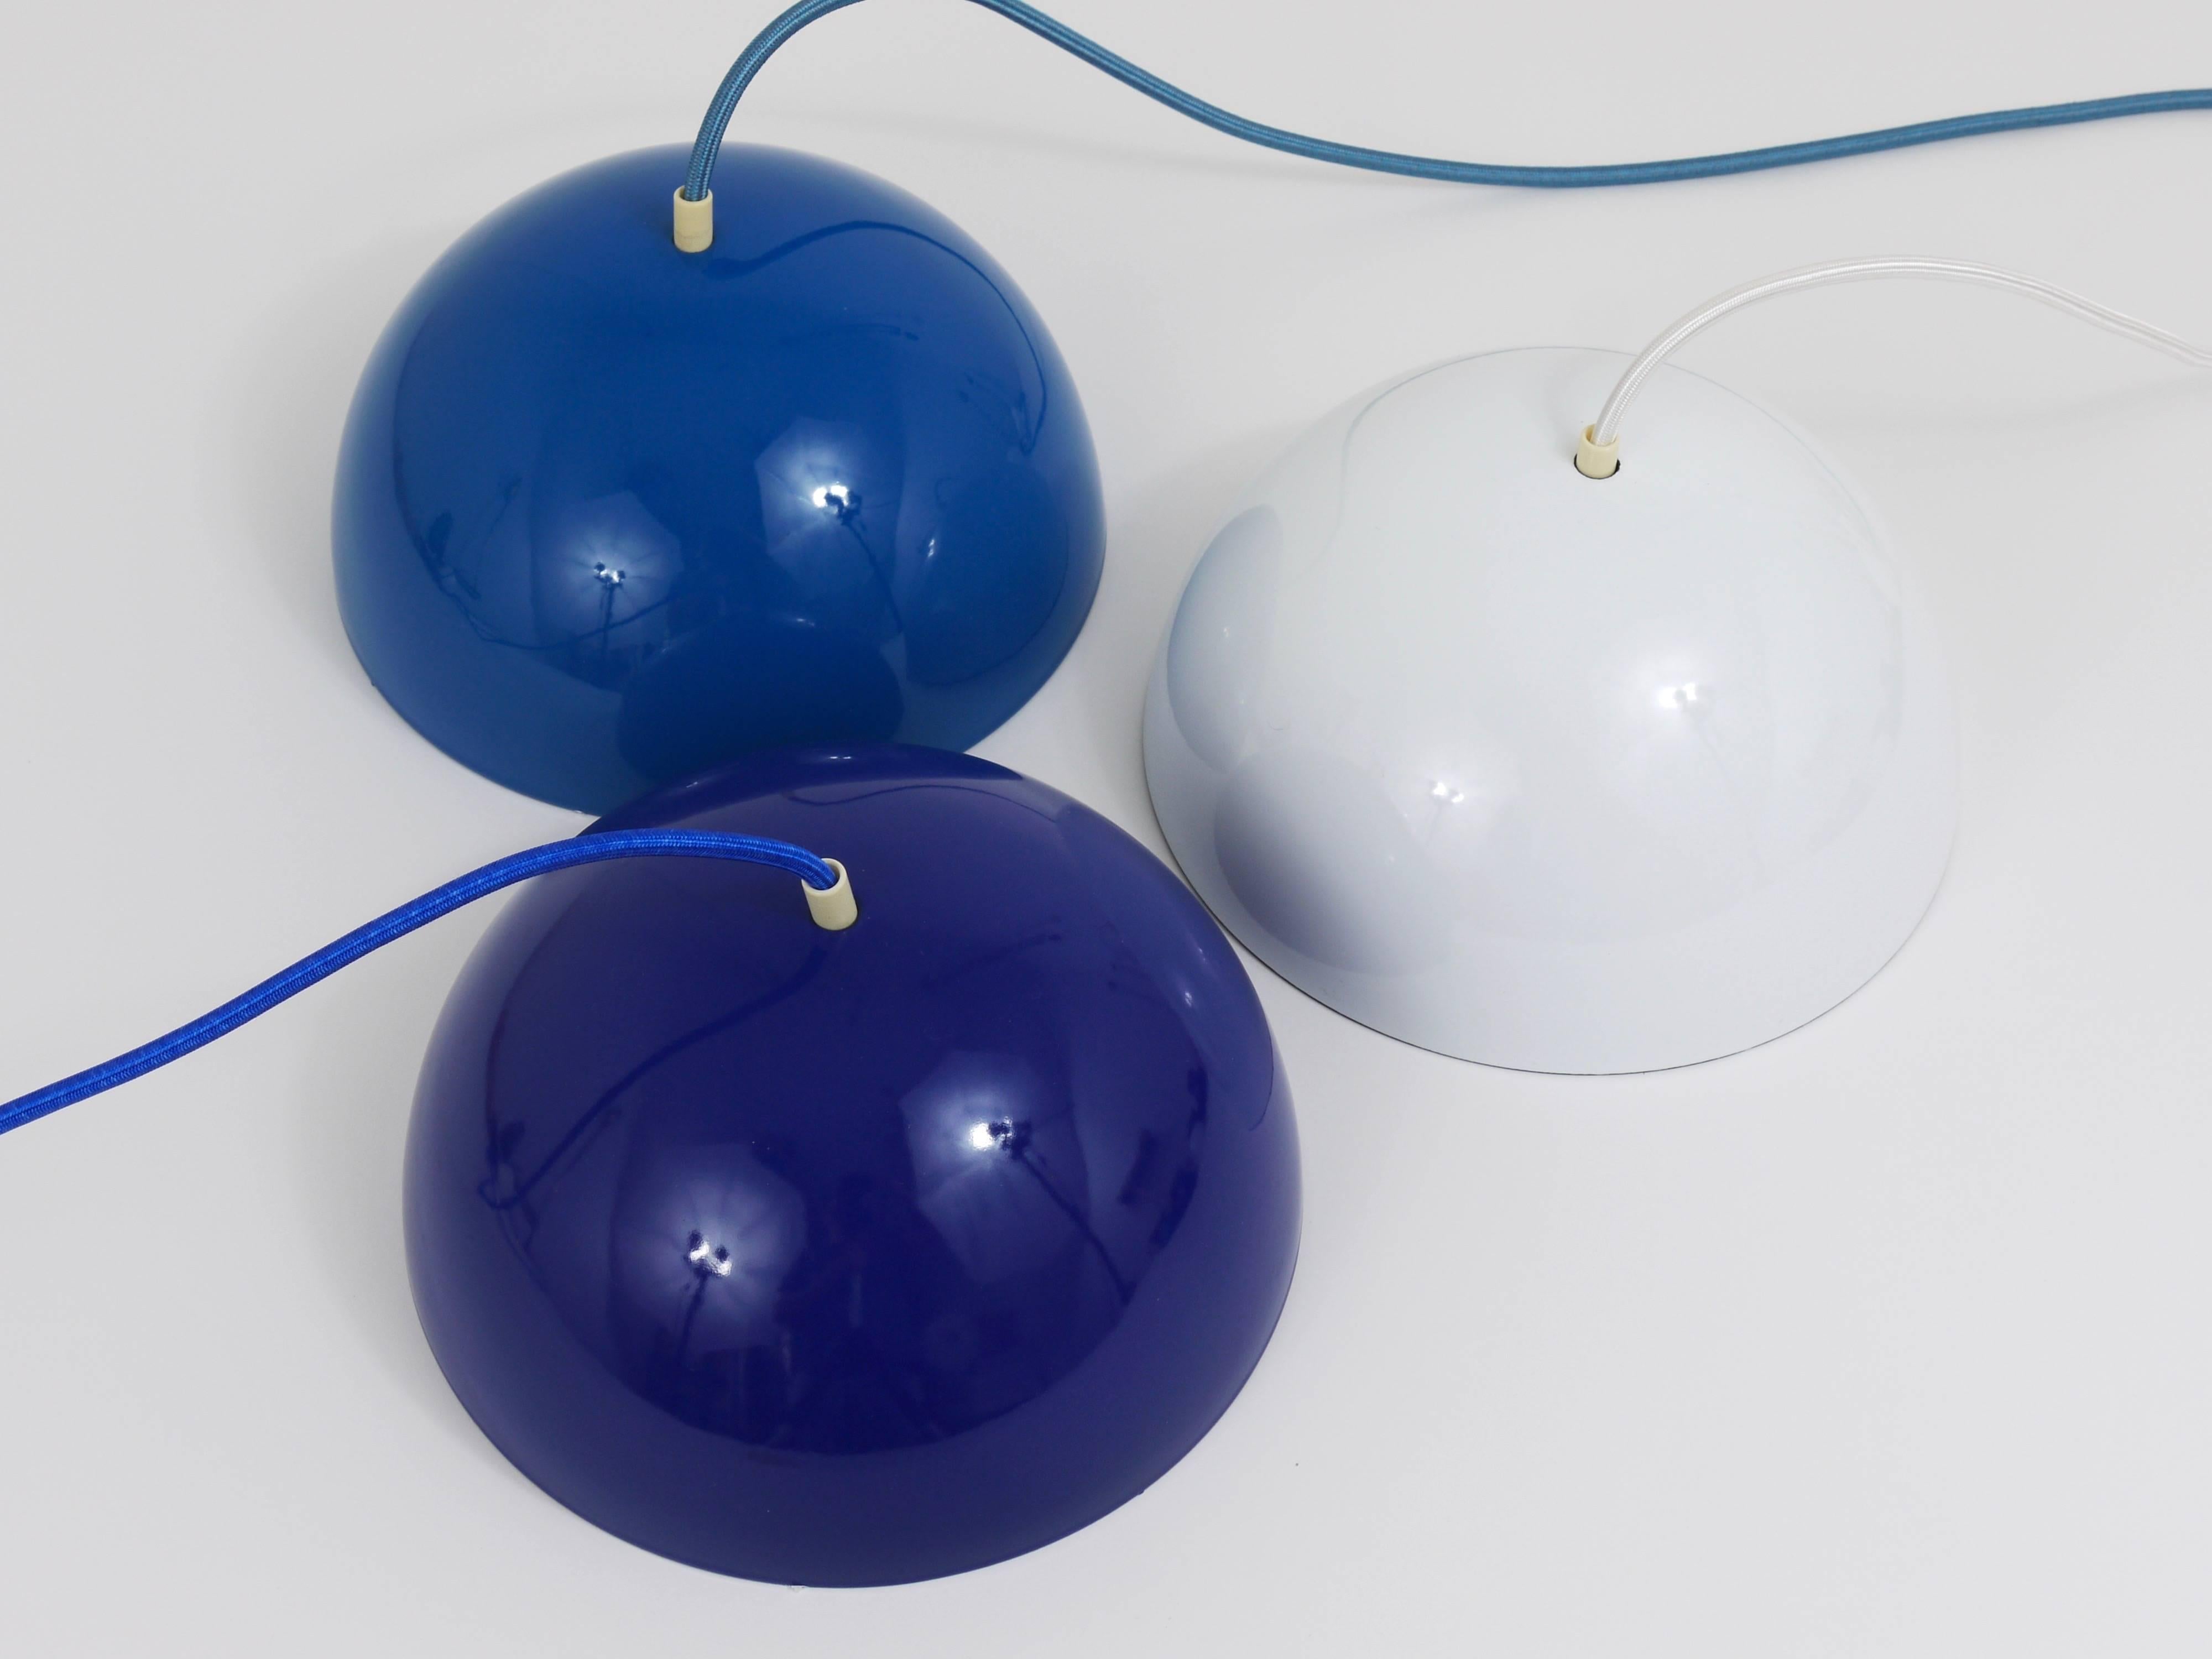 An iconic cobalt-blue flowerpot pendant light, designed in 1969 by Verner Panton for Louis Pulsen, Denmark. A simple but beautiful ceiling light, consisting of two enameled hemispherical lampshades facing each other. The lower lampshade has a red